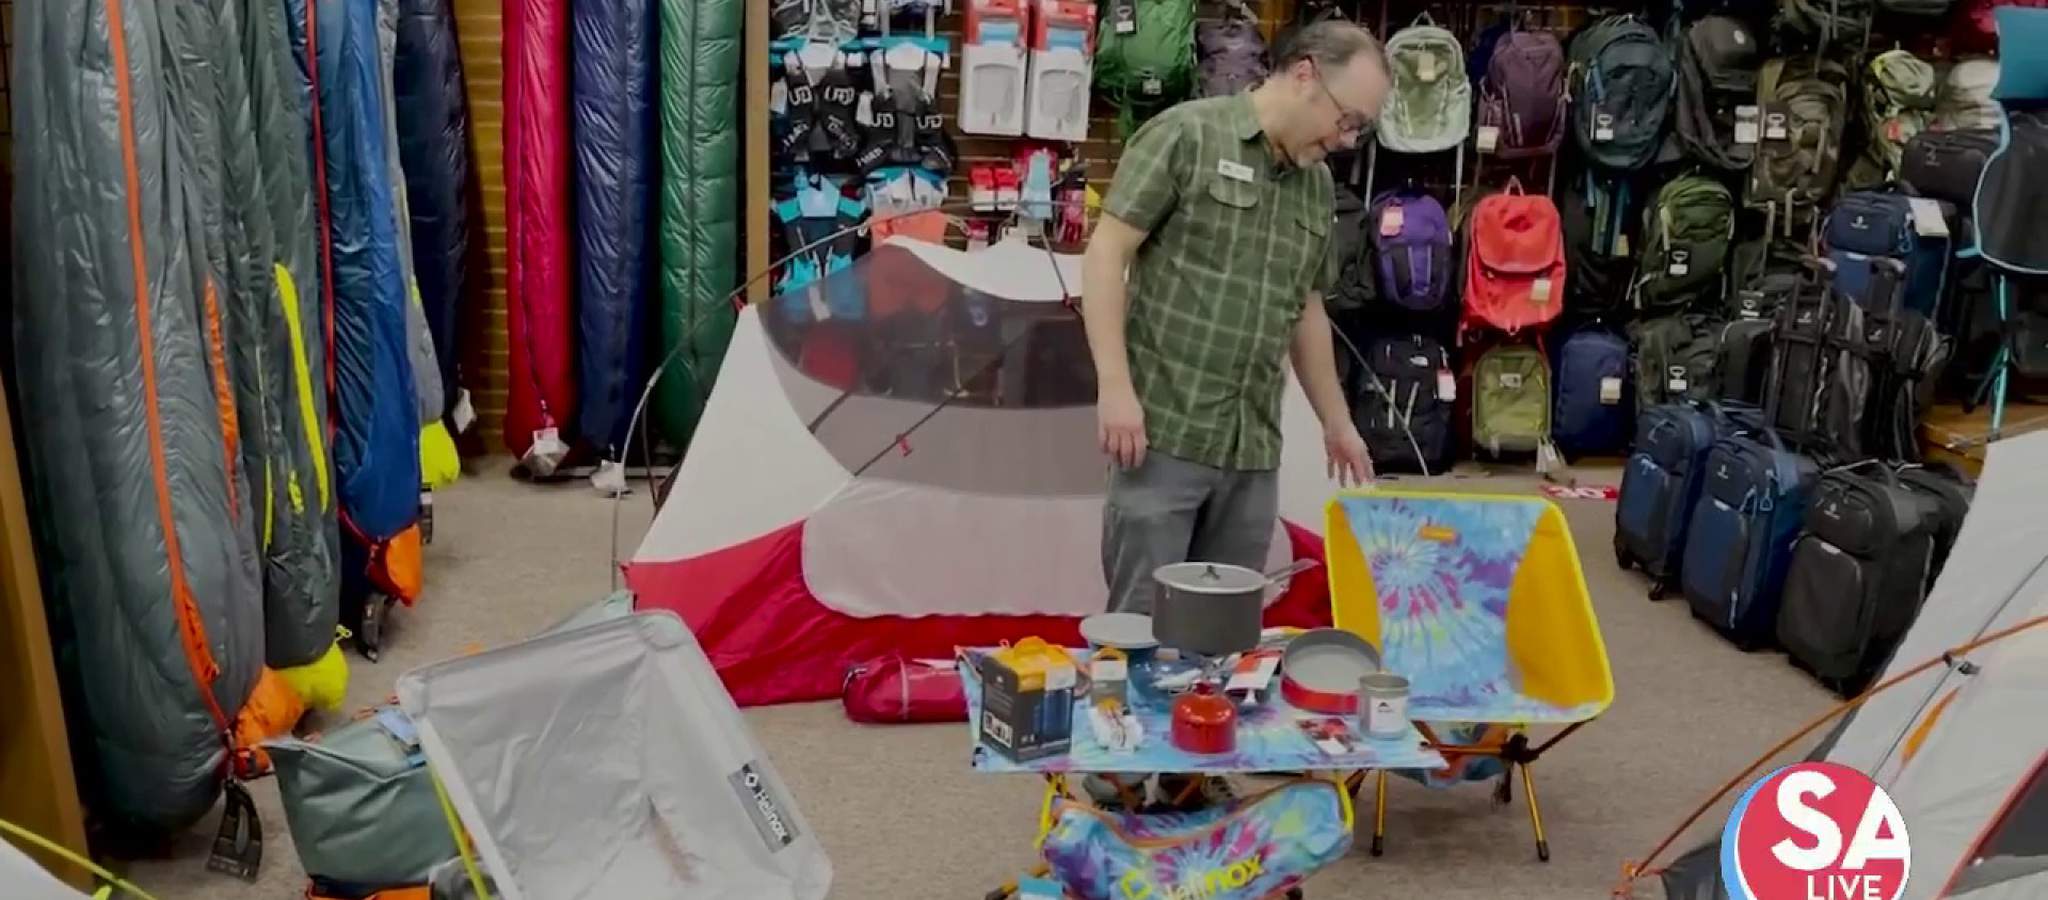 Up your spring camping game with seasonal essentials